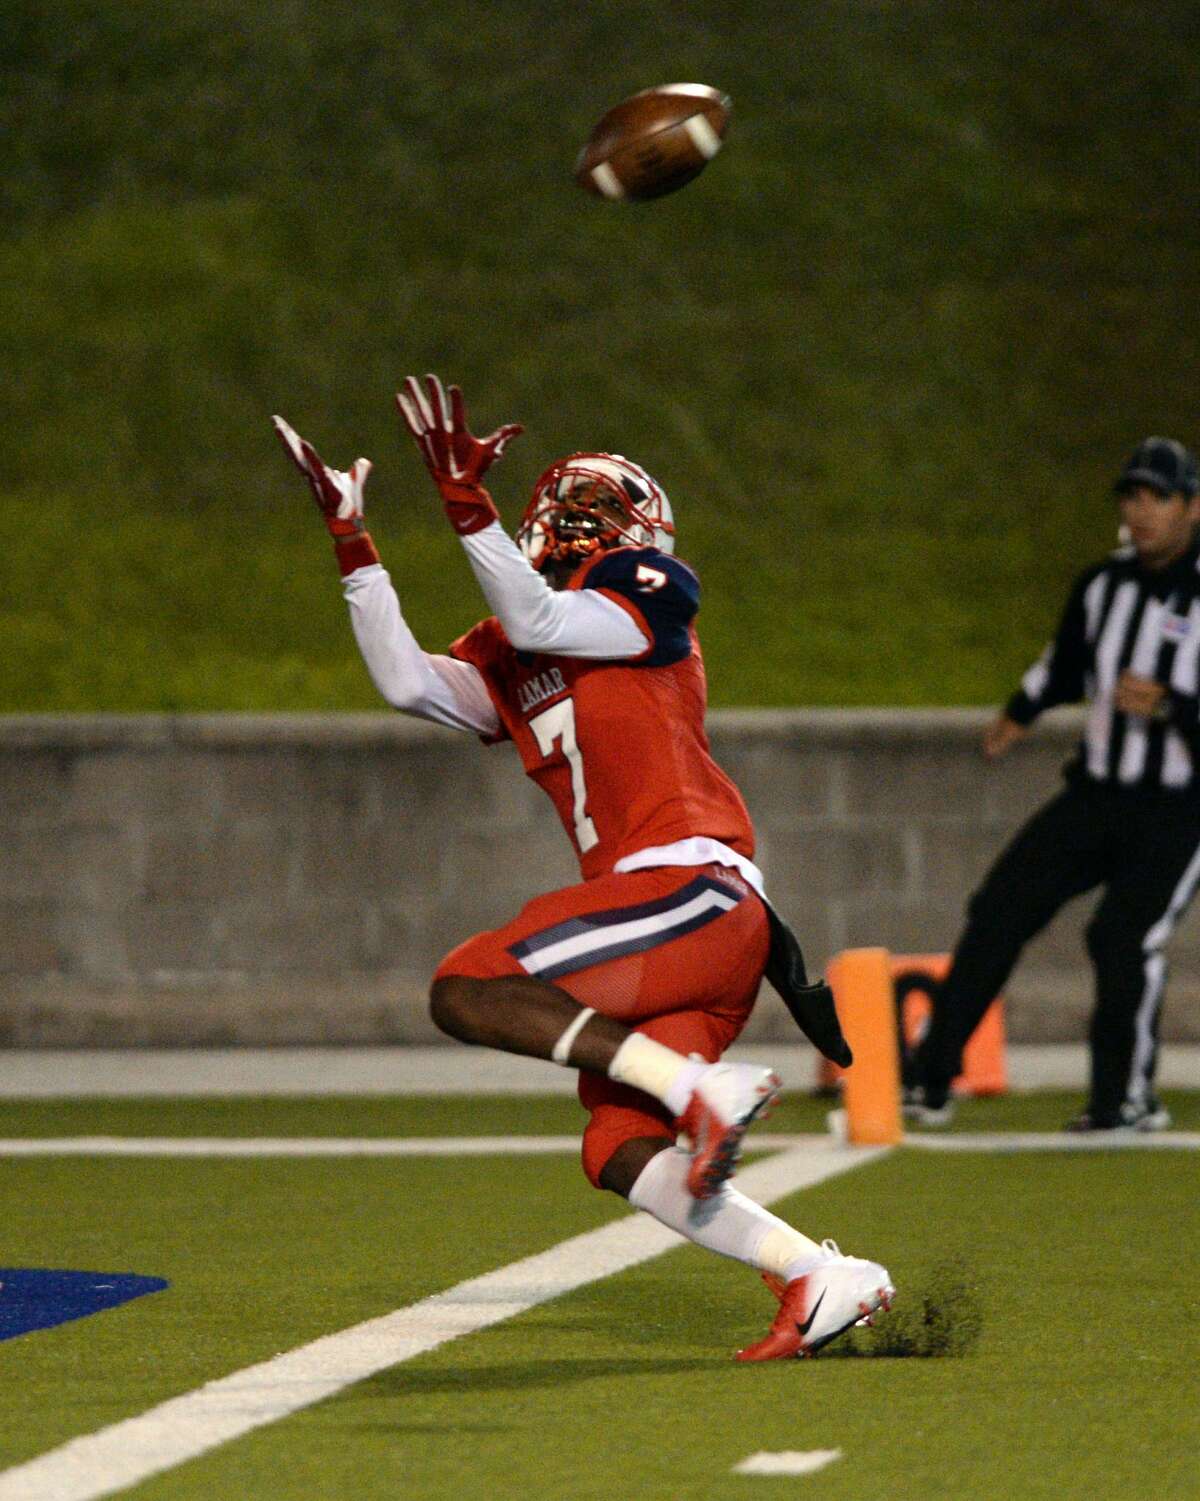 Ka'Veon Griffin (7) of Lamar makes a touchdown reception during the fourth quarter of a Class 6A Division I Region III bi-district football playoff game between the Lamar Texans and the Cy Falls Eagles on Friday, November 15, 2019 at Delmar Stadium, Houston, TX.